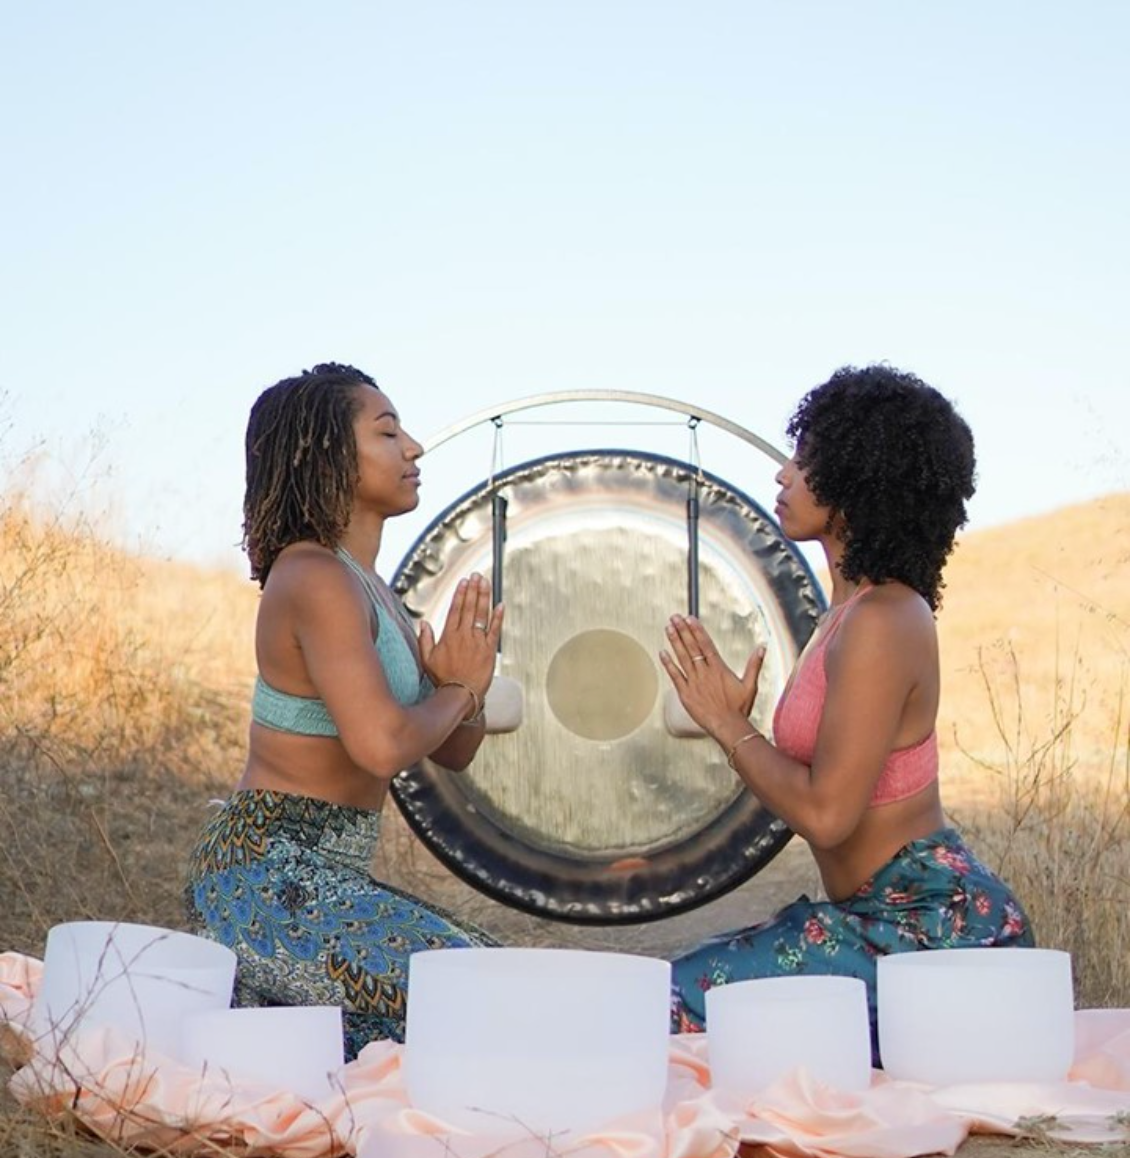 An Introduction to Sound Baths